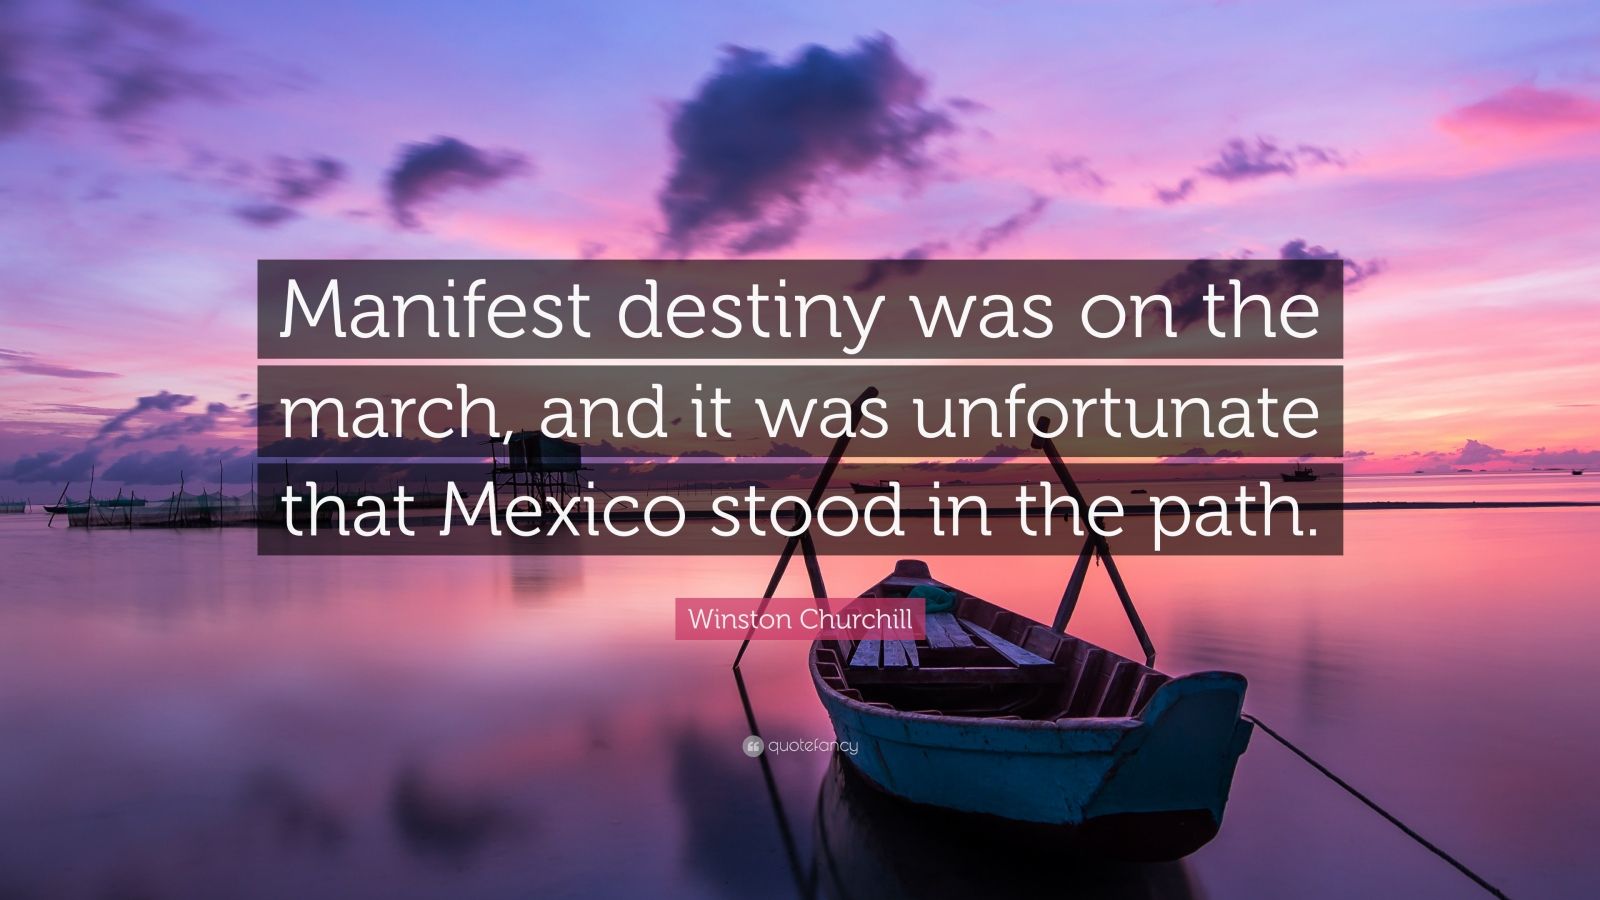 Winston Churchill Quote: “Manifest destiny was on the march, and it was